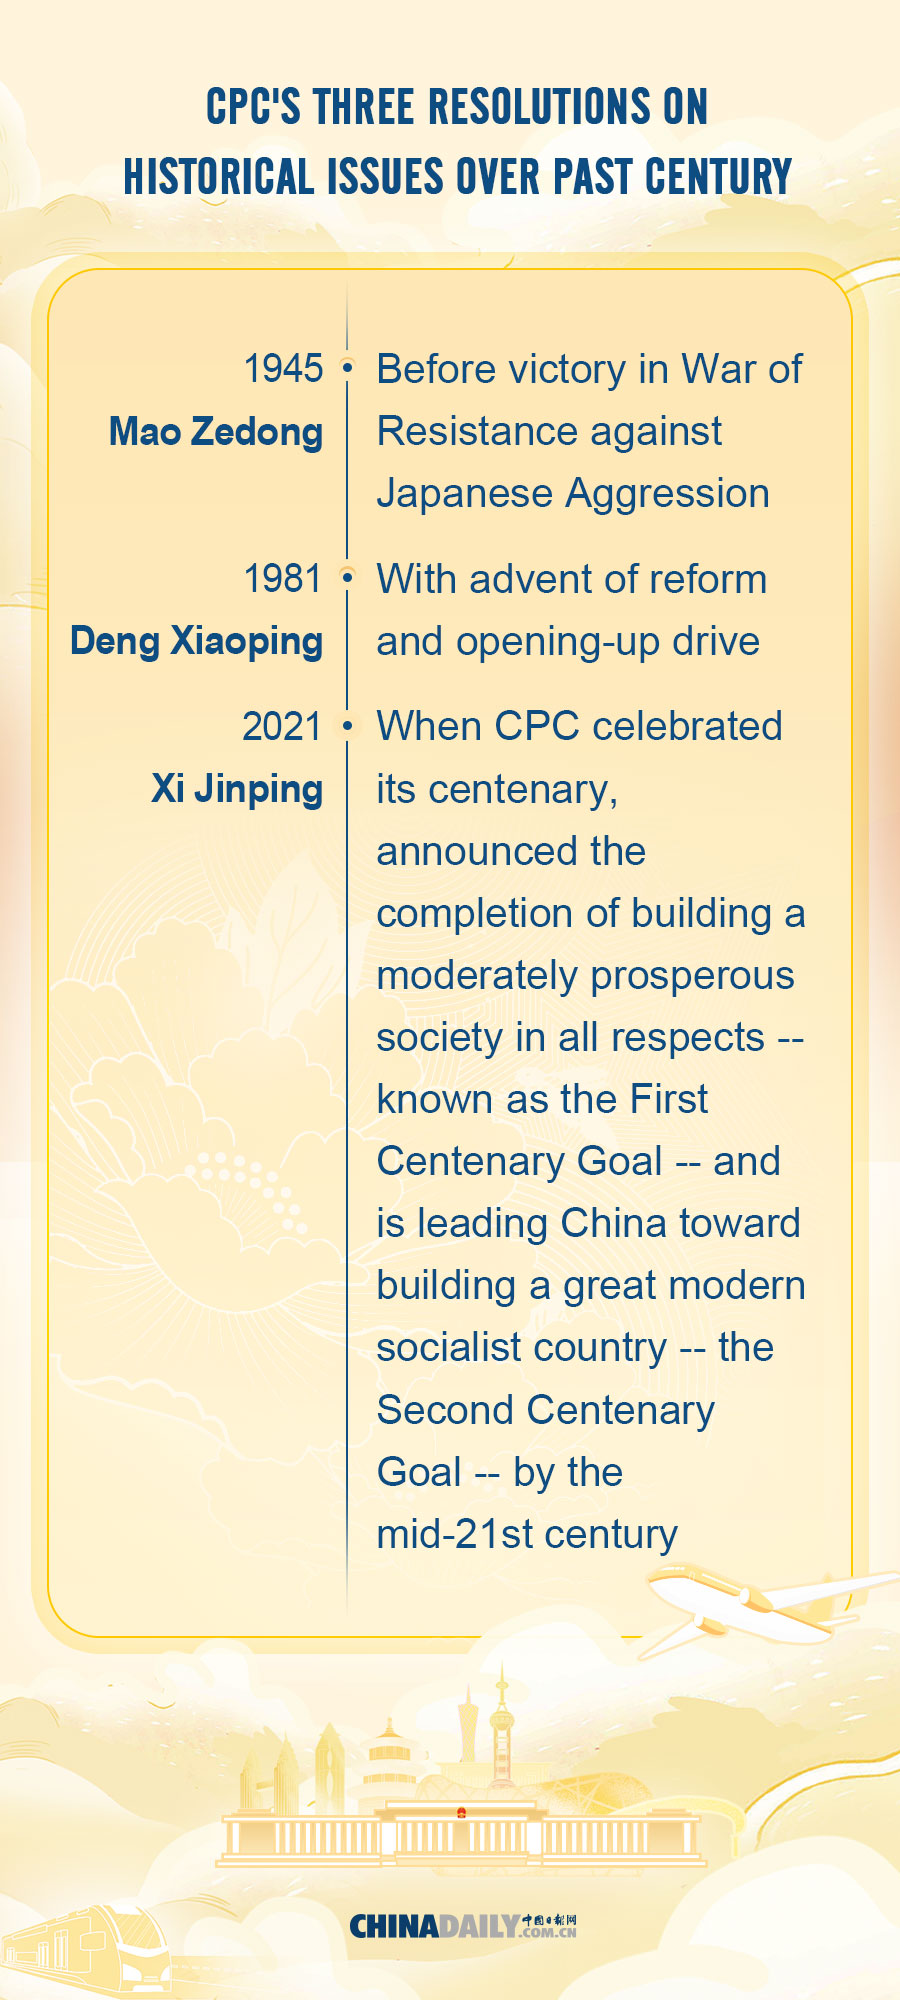 CPC's three resolutions on historical issues.jpeg